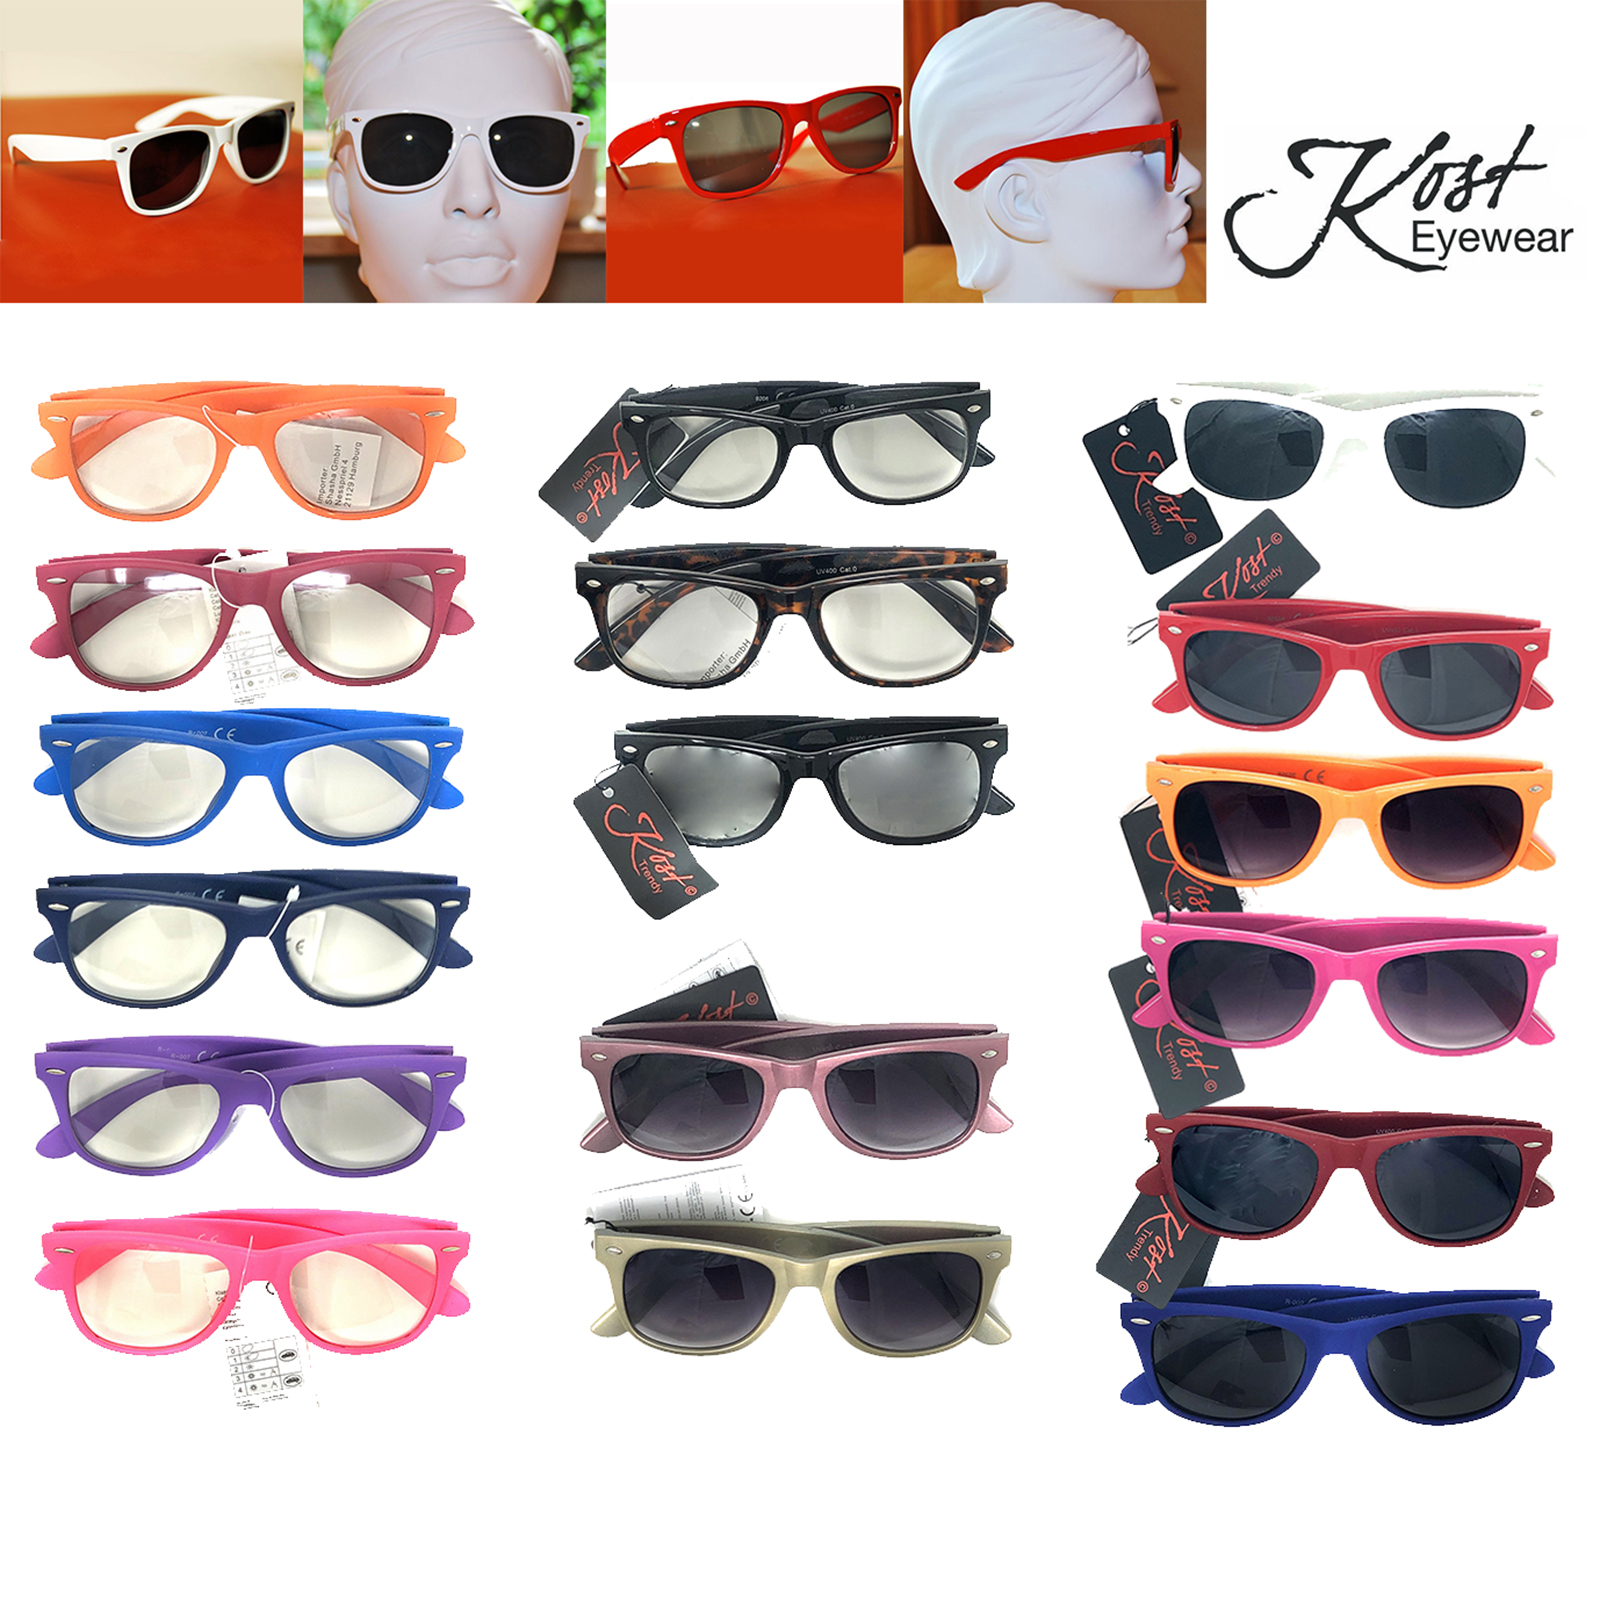 Wholesale Job lot of 48 Assorted Tinted & Clear Sunglasses for Men & Women from the KOST Nerd Collection